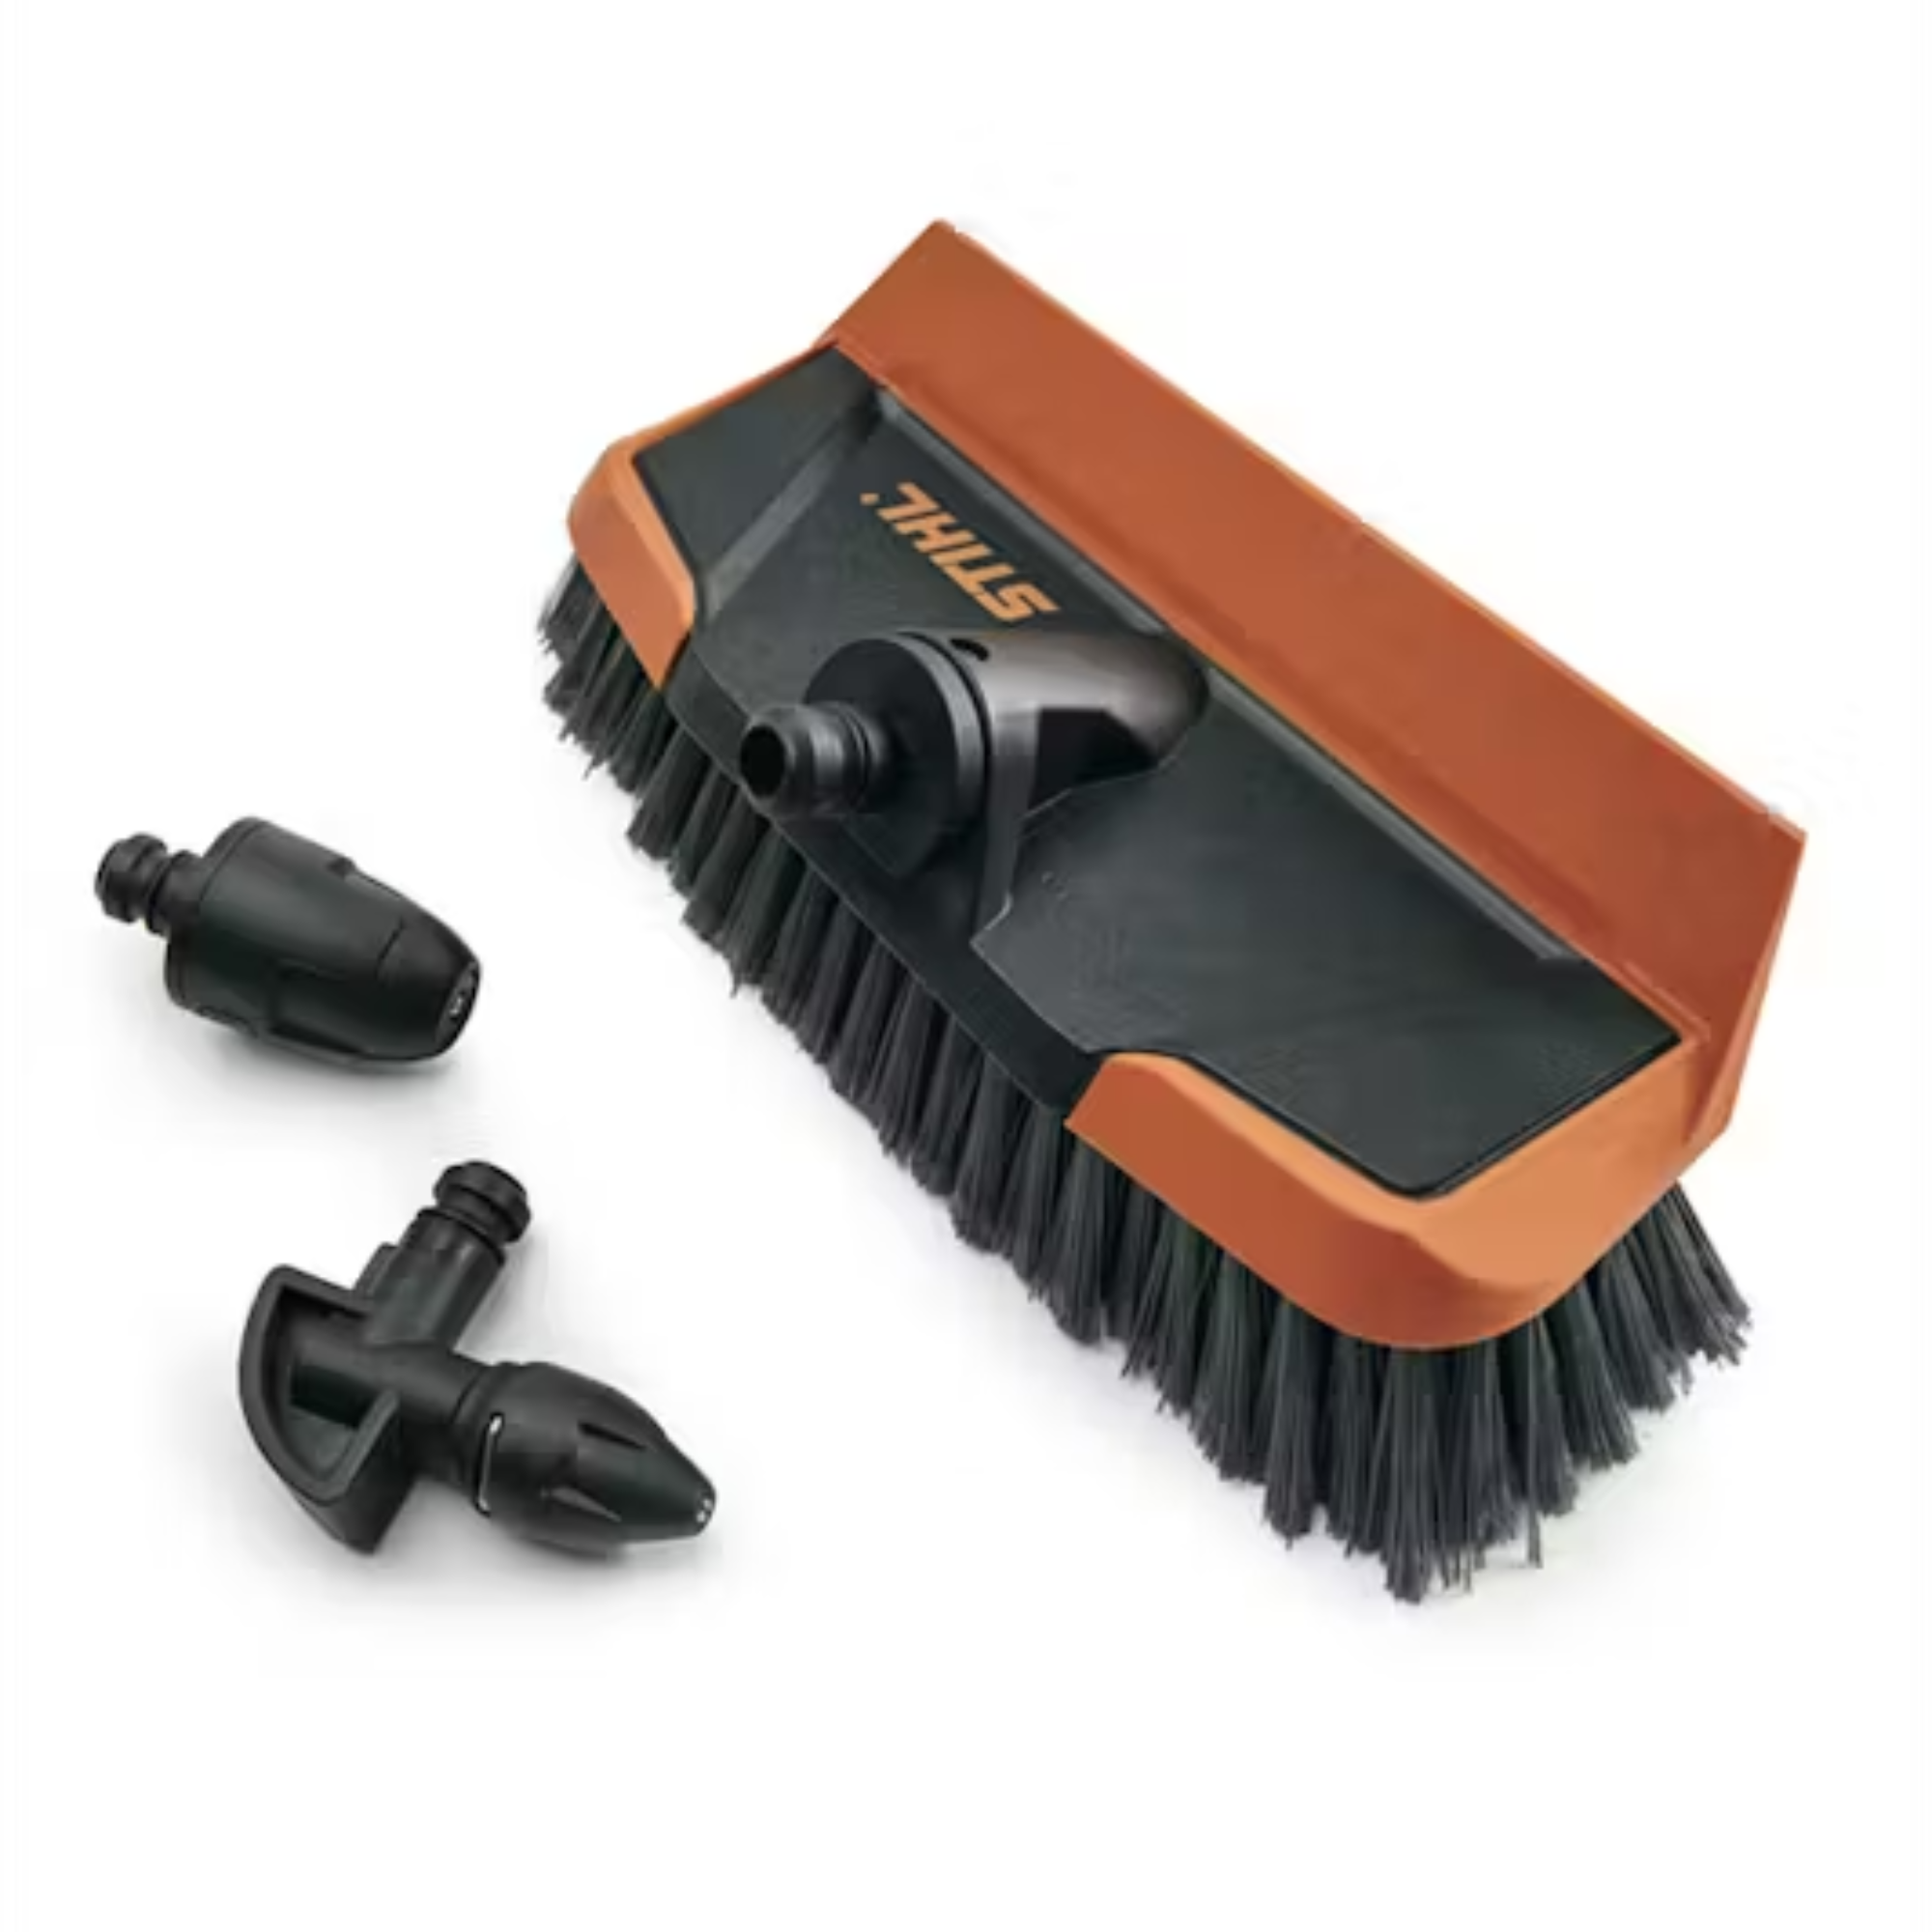 STIHL Pressure Washer Vehicle Cleaning Kit | RE Models  | 4910 500 6110